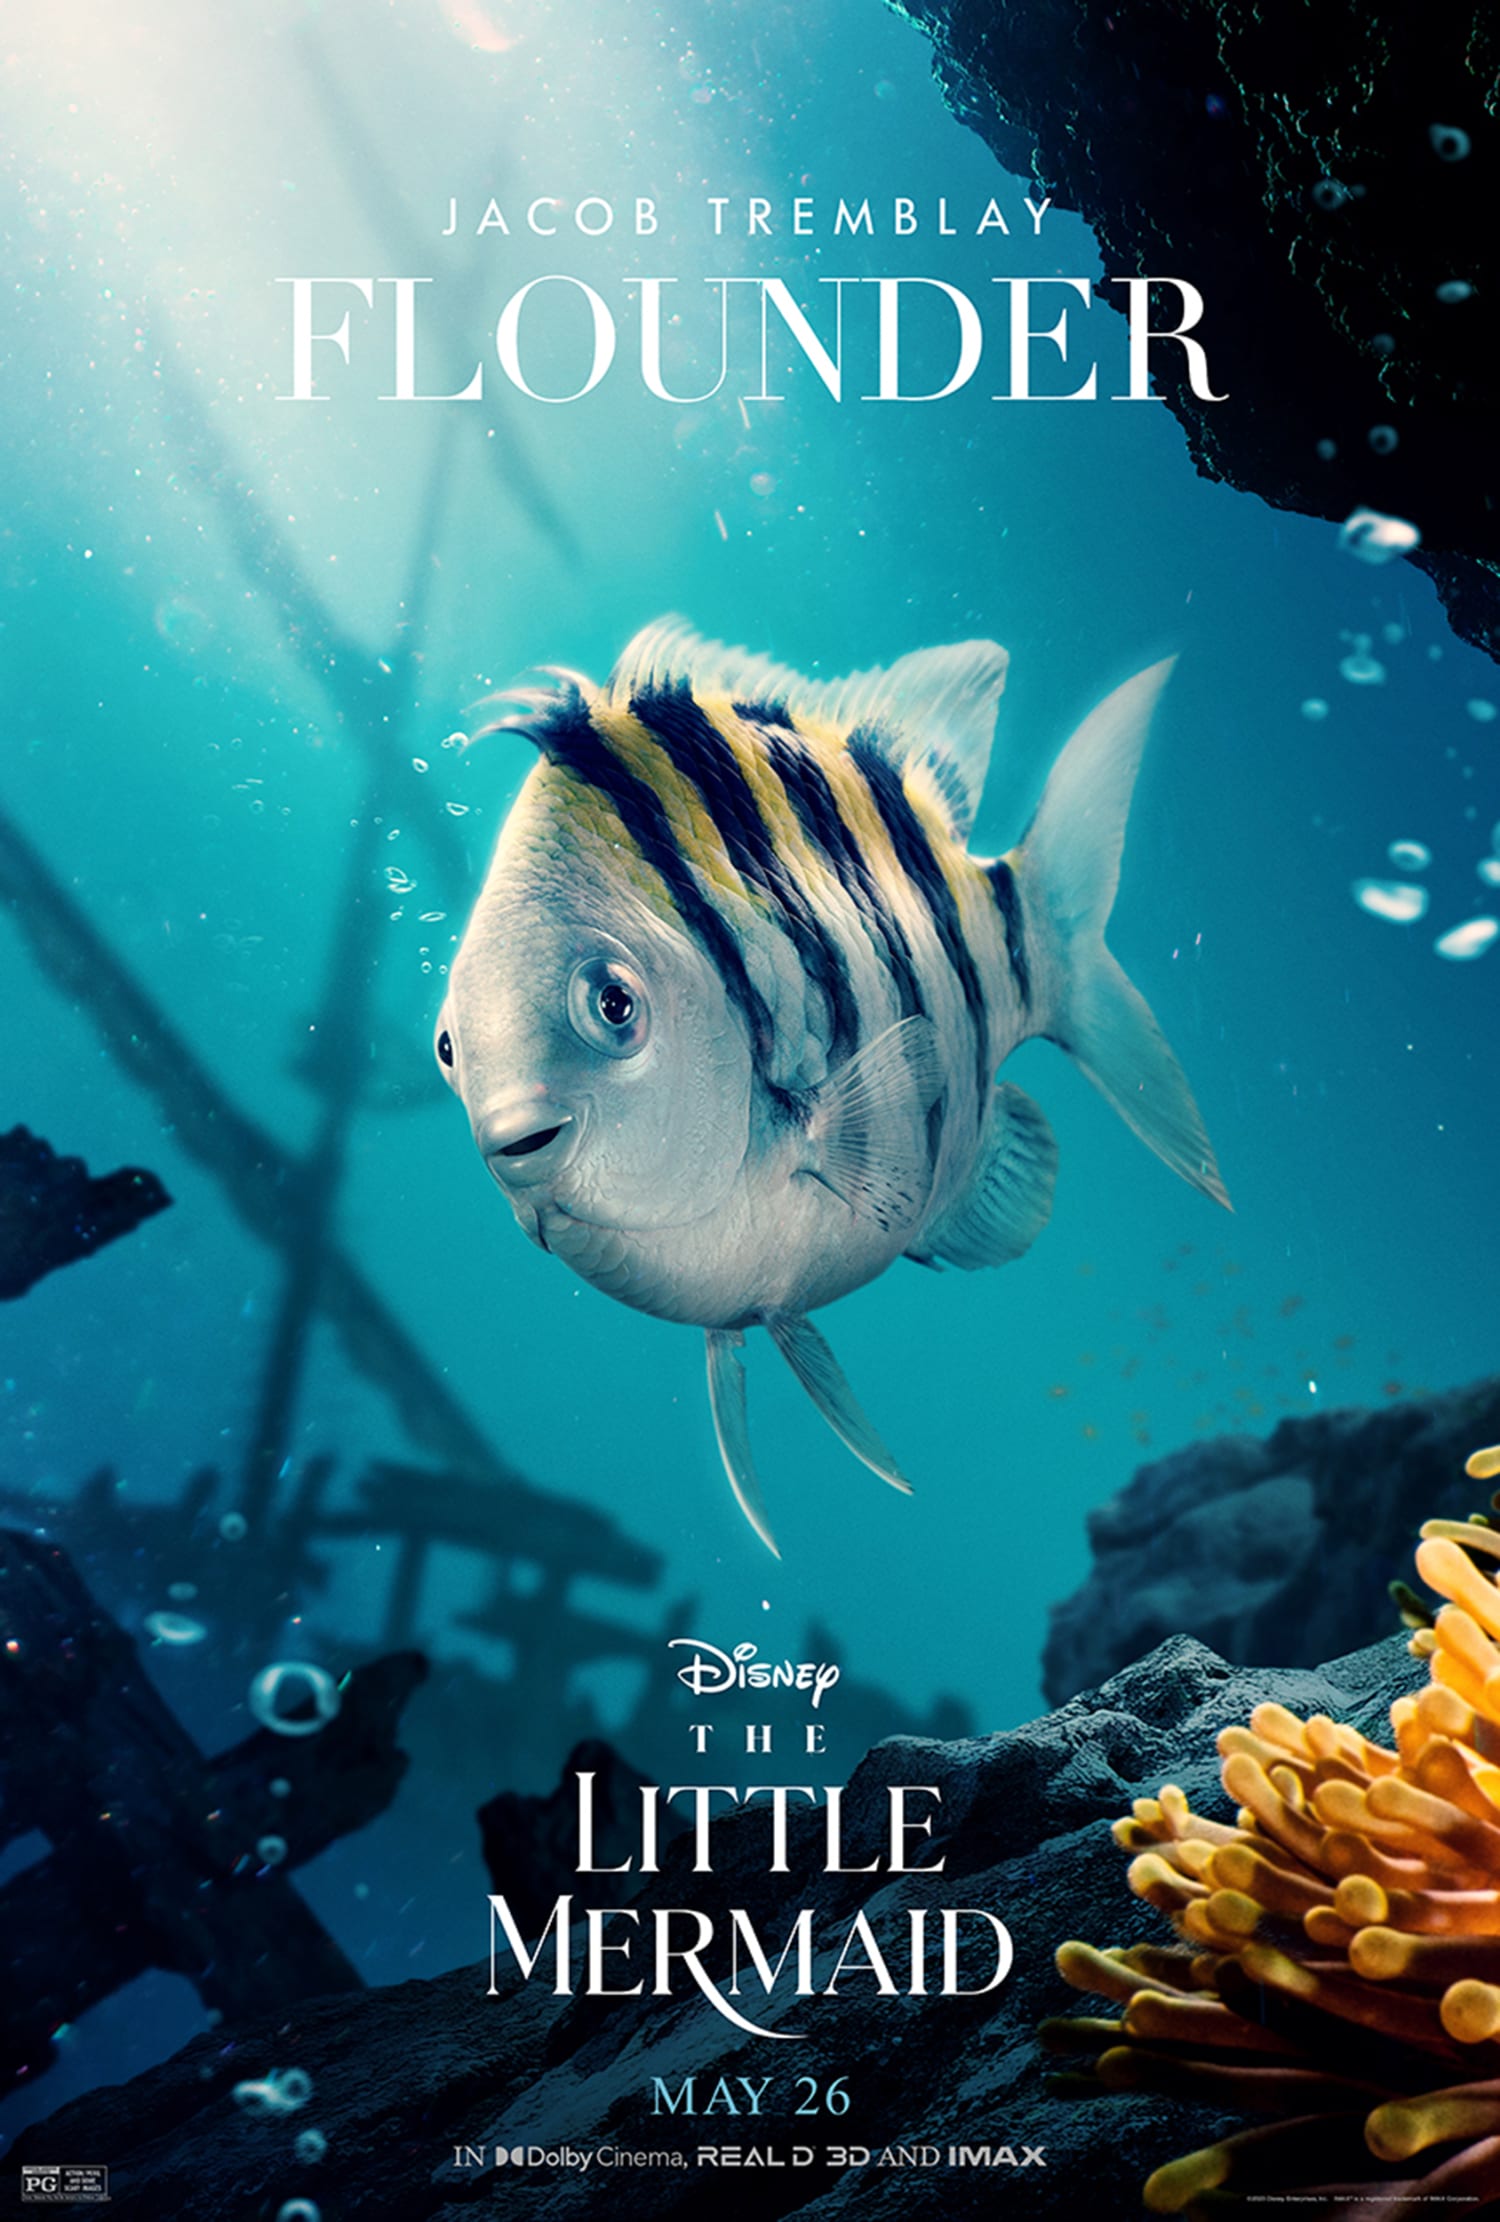 All-Star Cast Revealed for Live-Action / CGI 'The Little Mermaid